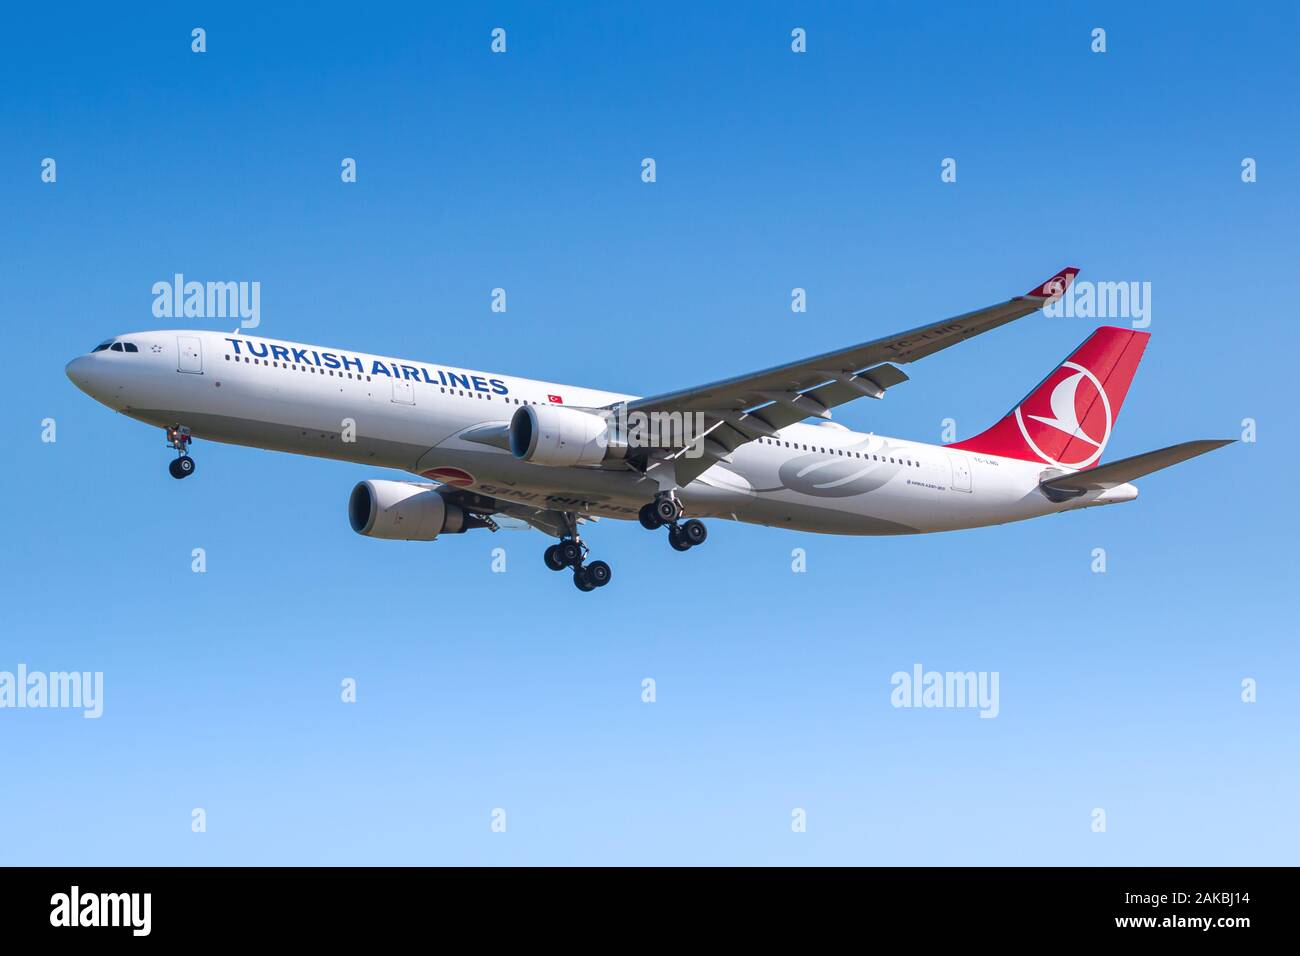 Paris, France - August 17, 2018: Turkish Airlines Airbus A330 airplane at Paris Charles de Gaulle airport (CDG) in France. Airbus is an aircraft manuf Stock Photo